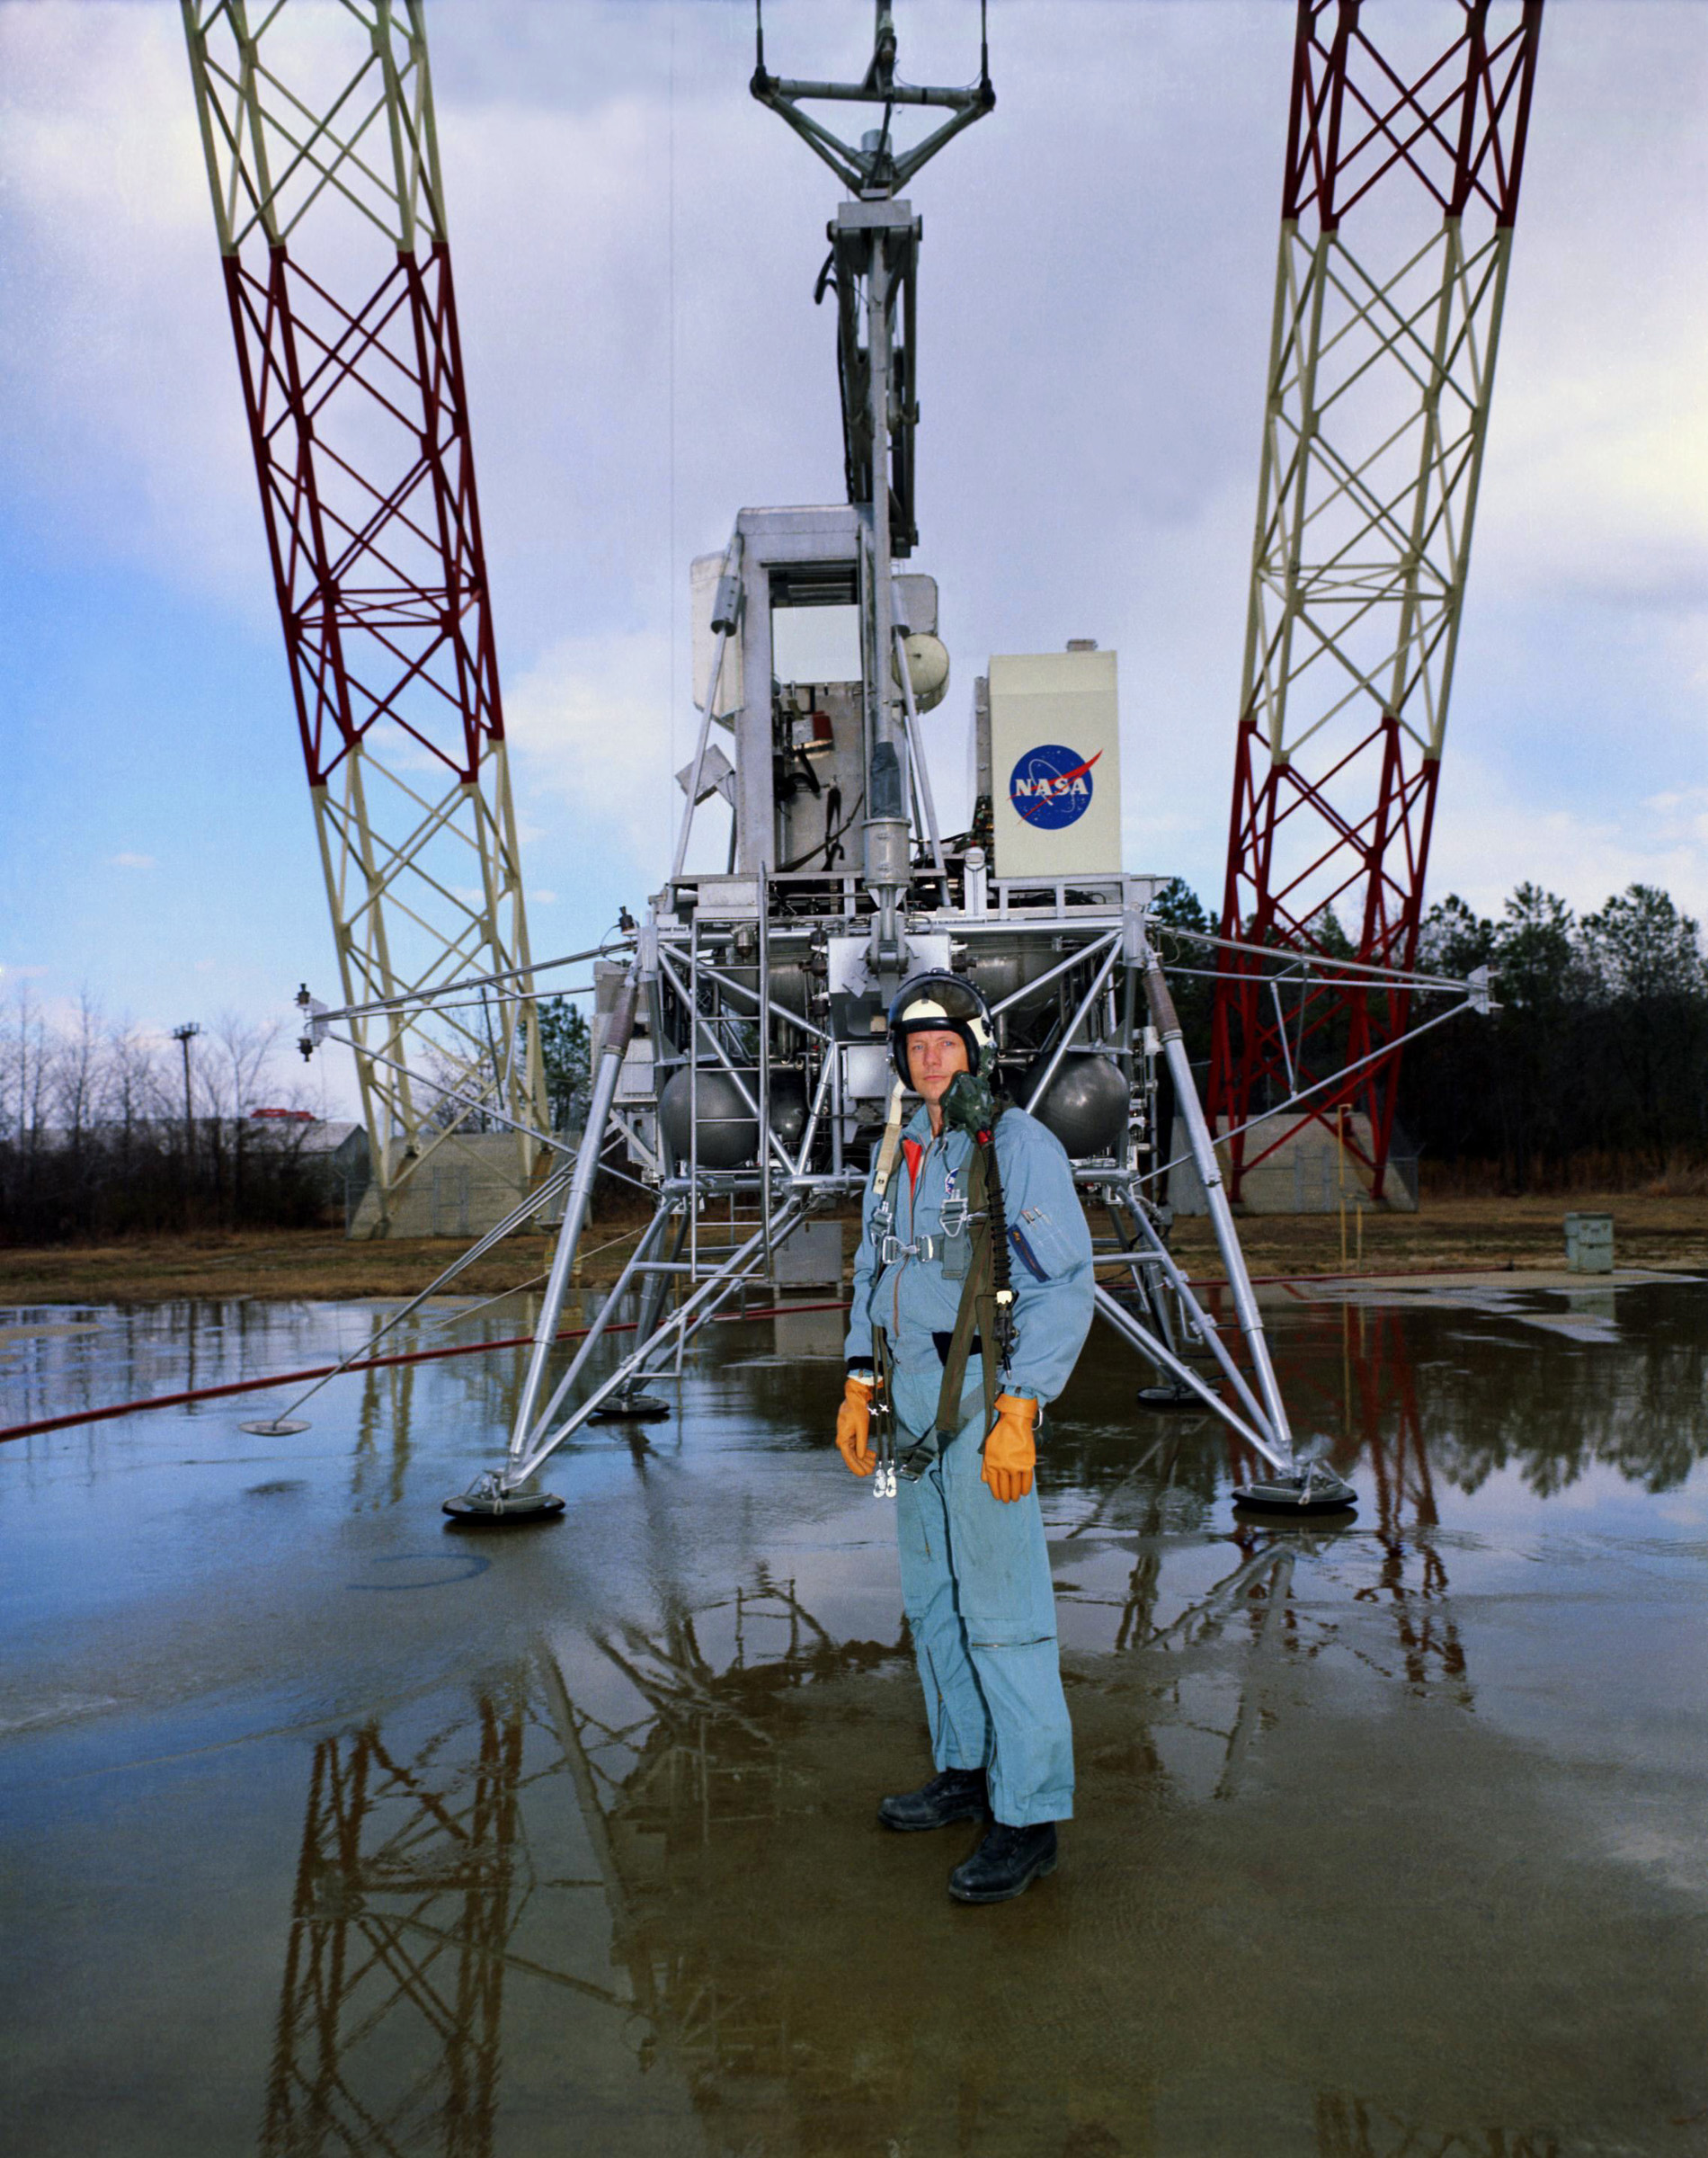 Neil A. Armstrong stands in front of the Lunar Module simulator at the Lunar Landing Research Facility (LLRF) at NASA’s Langley Research Center in Hampton, Virginia